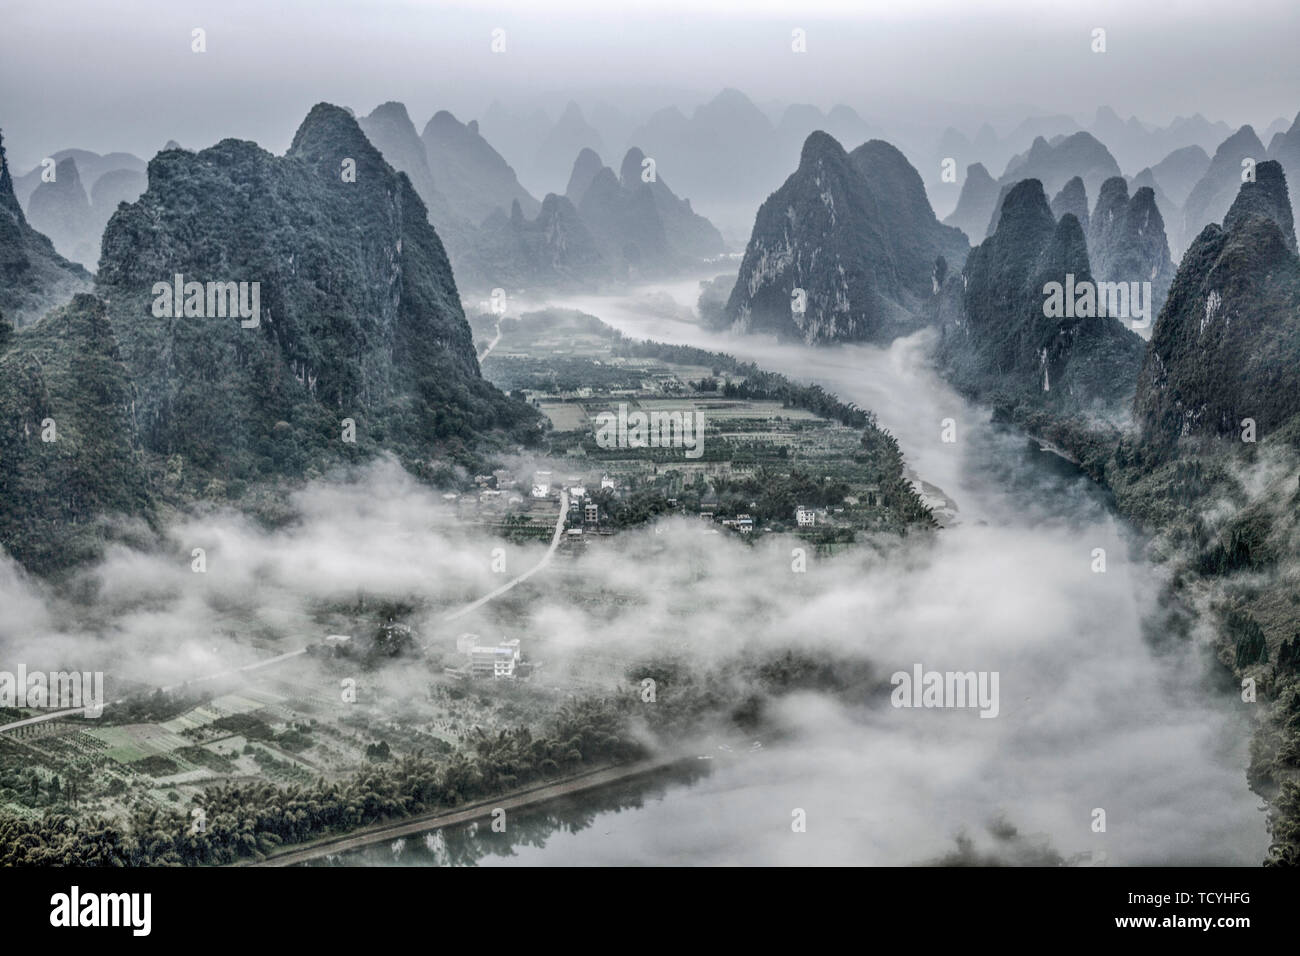 In July 2015, it was filmed in the scenic spot of Guilin City, Guangxi Zhuang Autonomous Region. In the morning, climb to the top of Xianggong to shoot beautiful scenery, look around, sunrise, sea of clouds, mountains meandering, graceful peaks, Xianggong Mountain is the best shooting place for sunrise in the Li River, every mountain, every beach of water, mountains and rivers depend on each other, strange peaks haunt. The combination of light and shadow, peak forest, clouds and fog, river water and color glow at different times, a charming landscape painting. Stock Photo